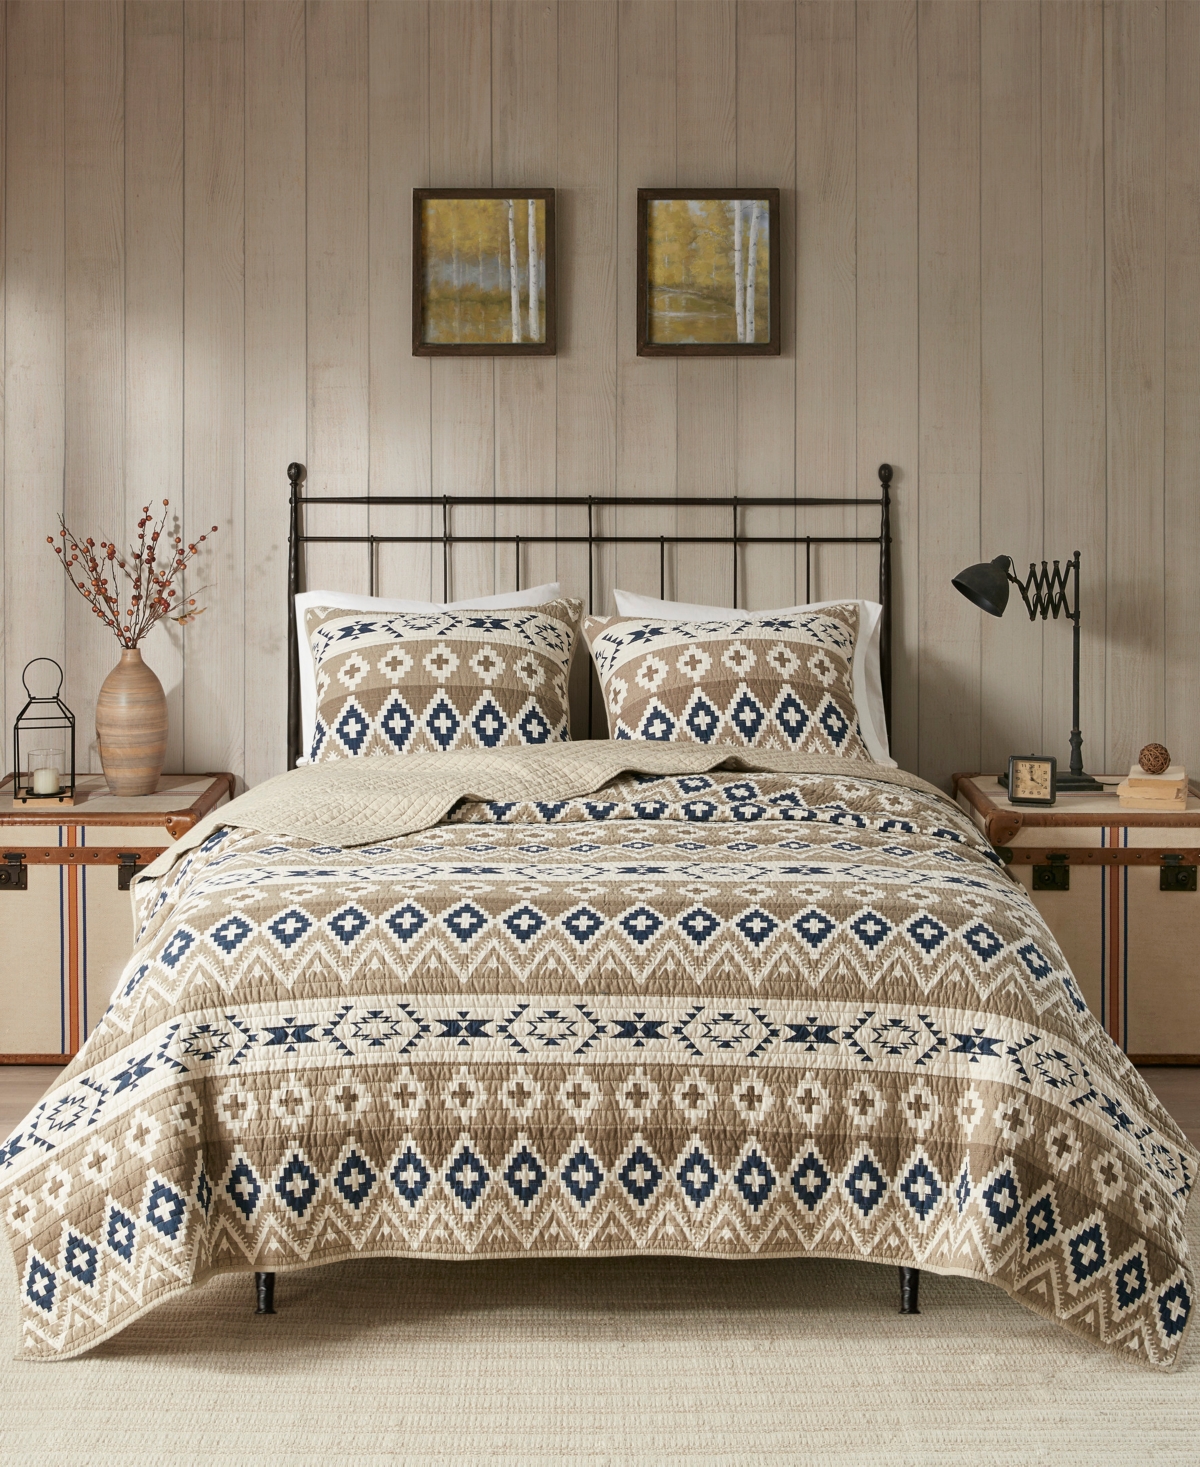 Woolrich Montana Printed Cotton Oversized 3 Piece Quilt Set, Full/queen In Tan